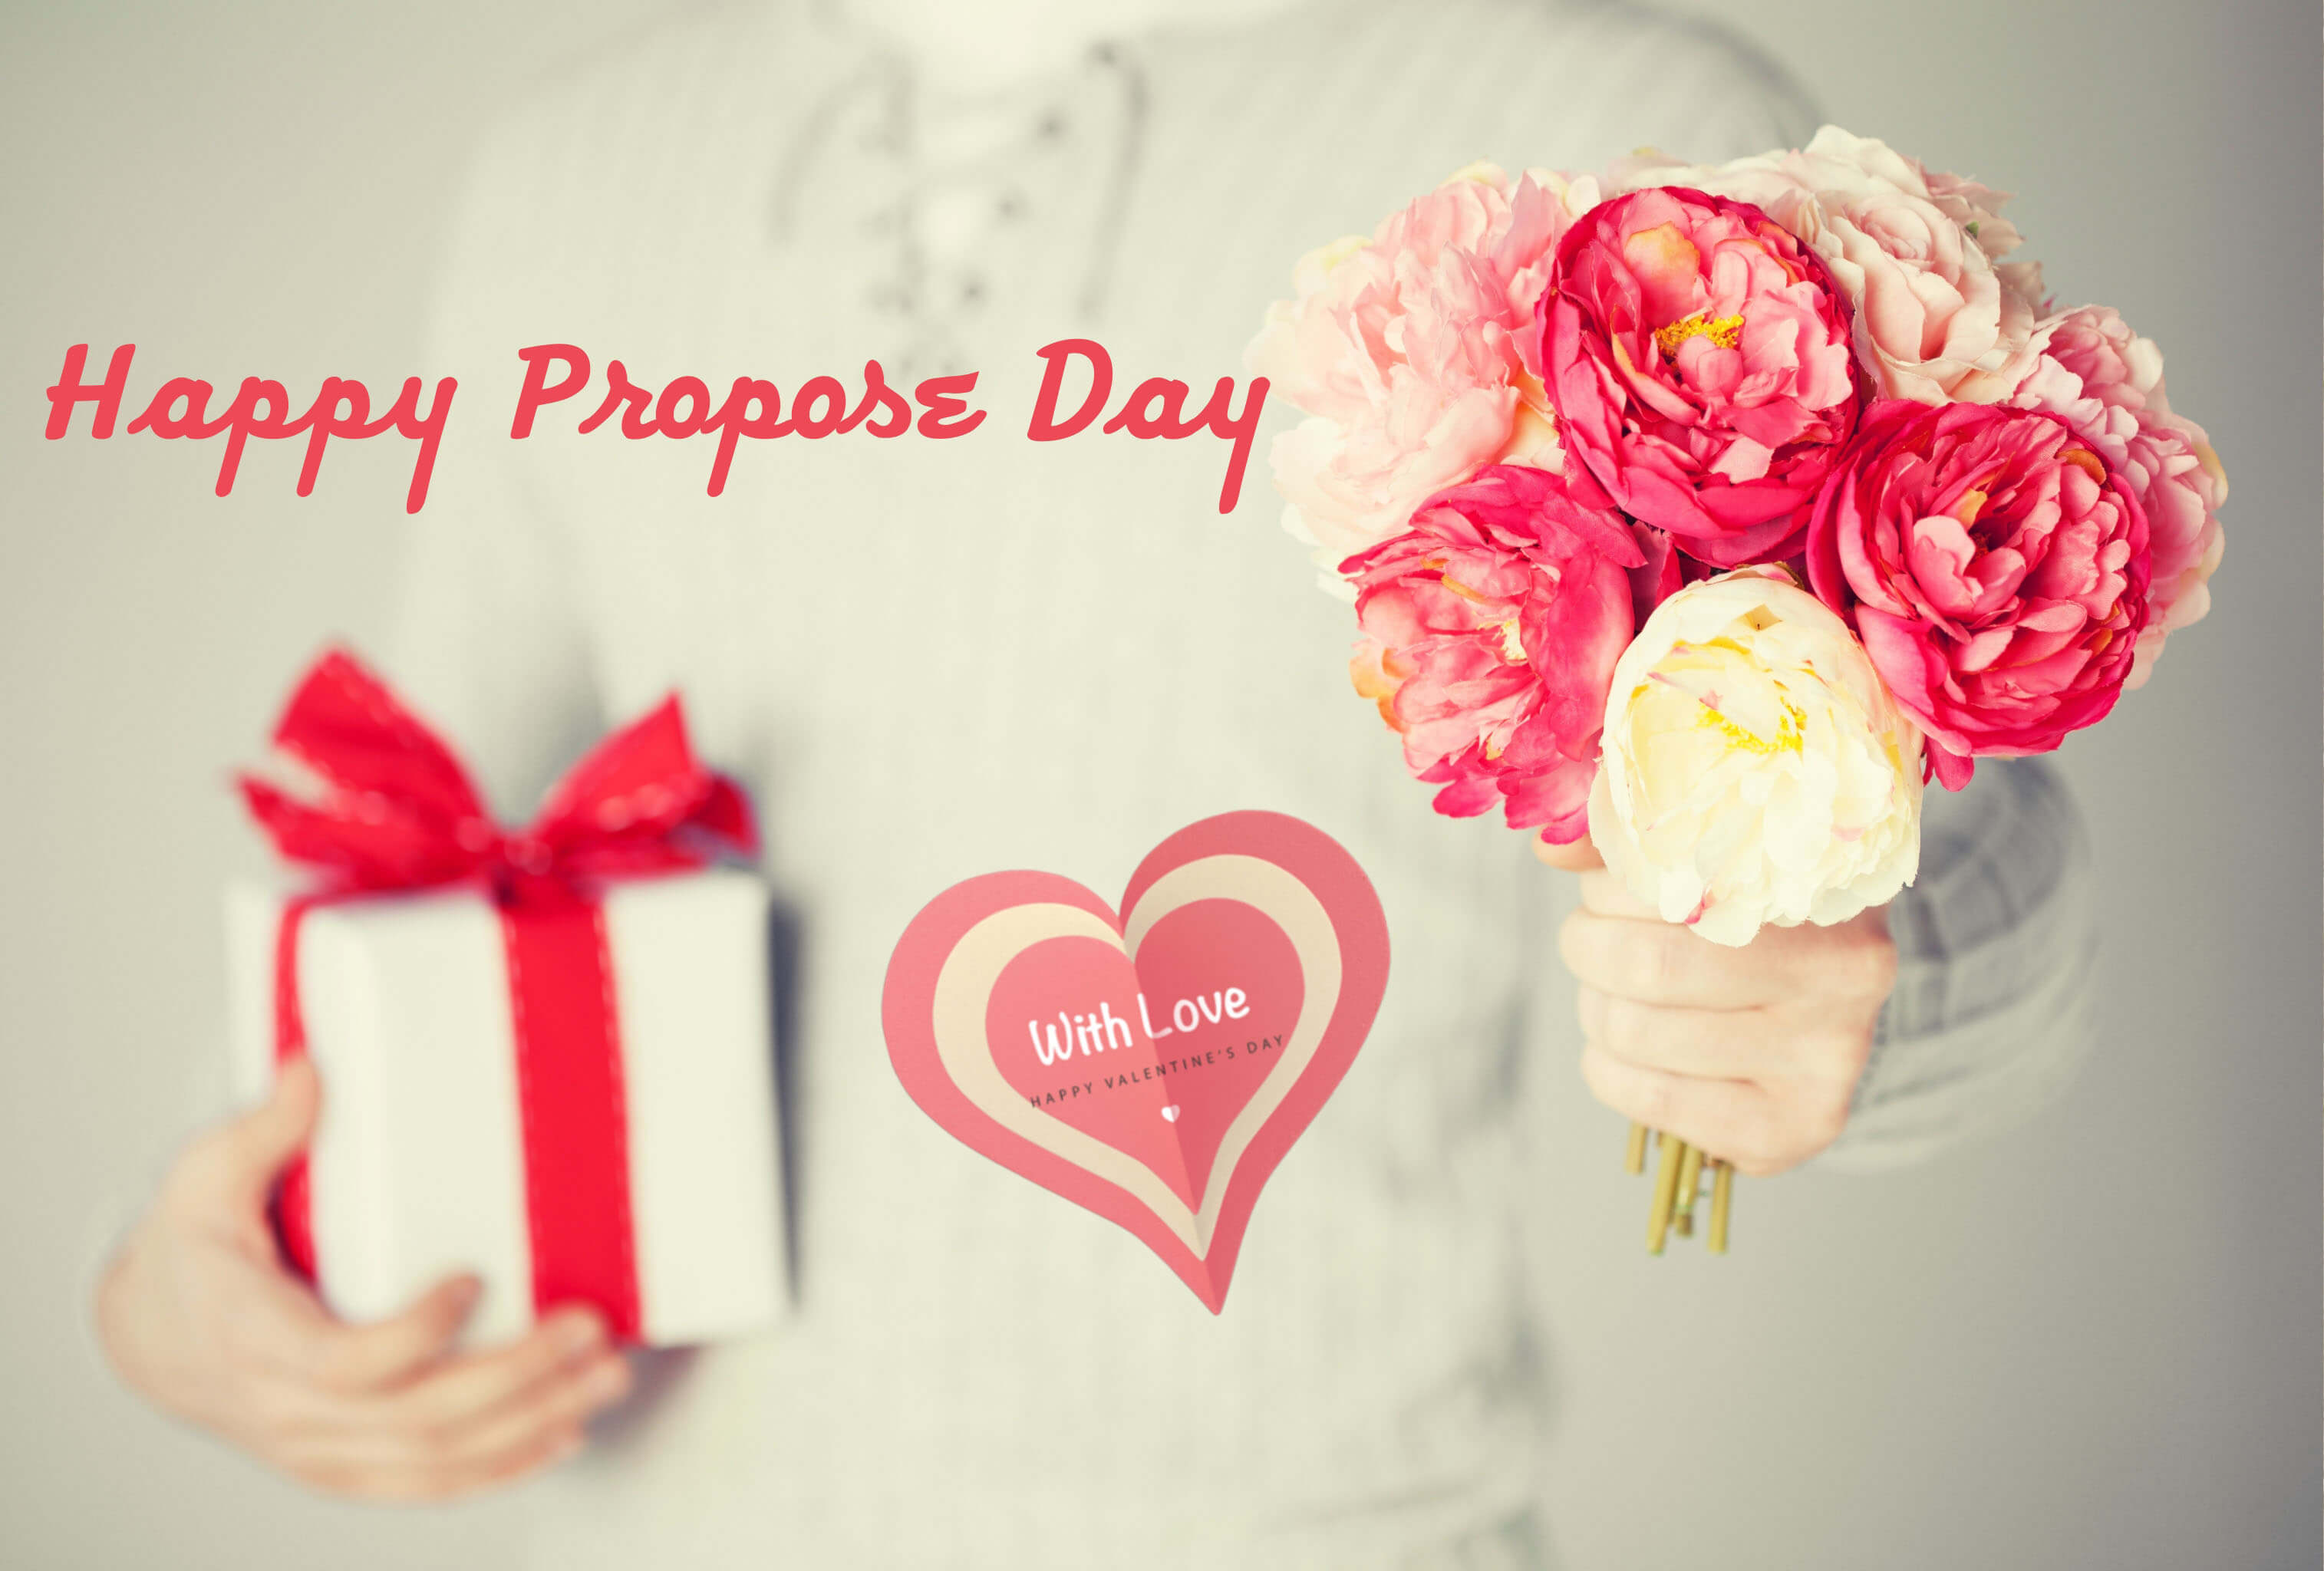 Happy Propose Day Gift Roses 4k Desktop Background - Happy Propose Day Hd - HD Wallpaper 